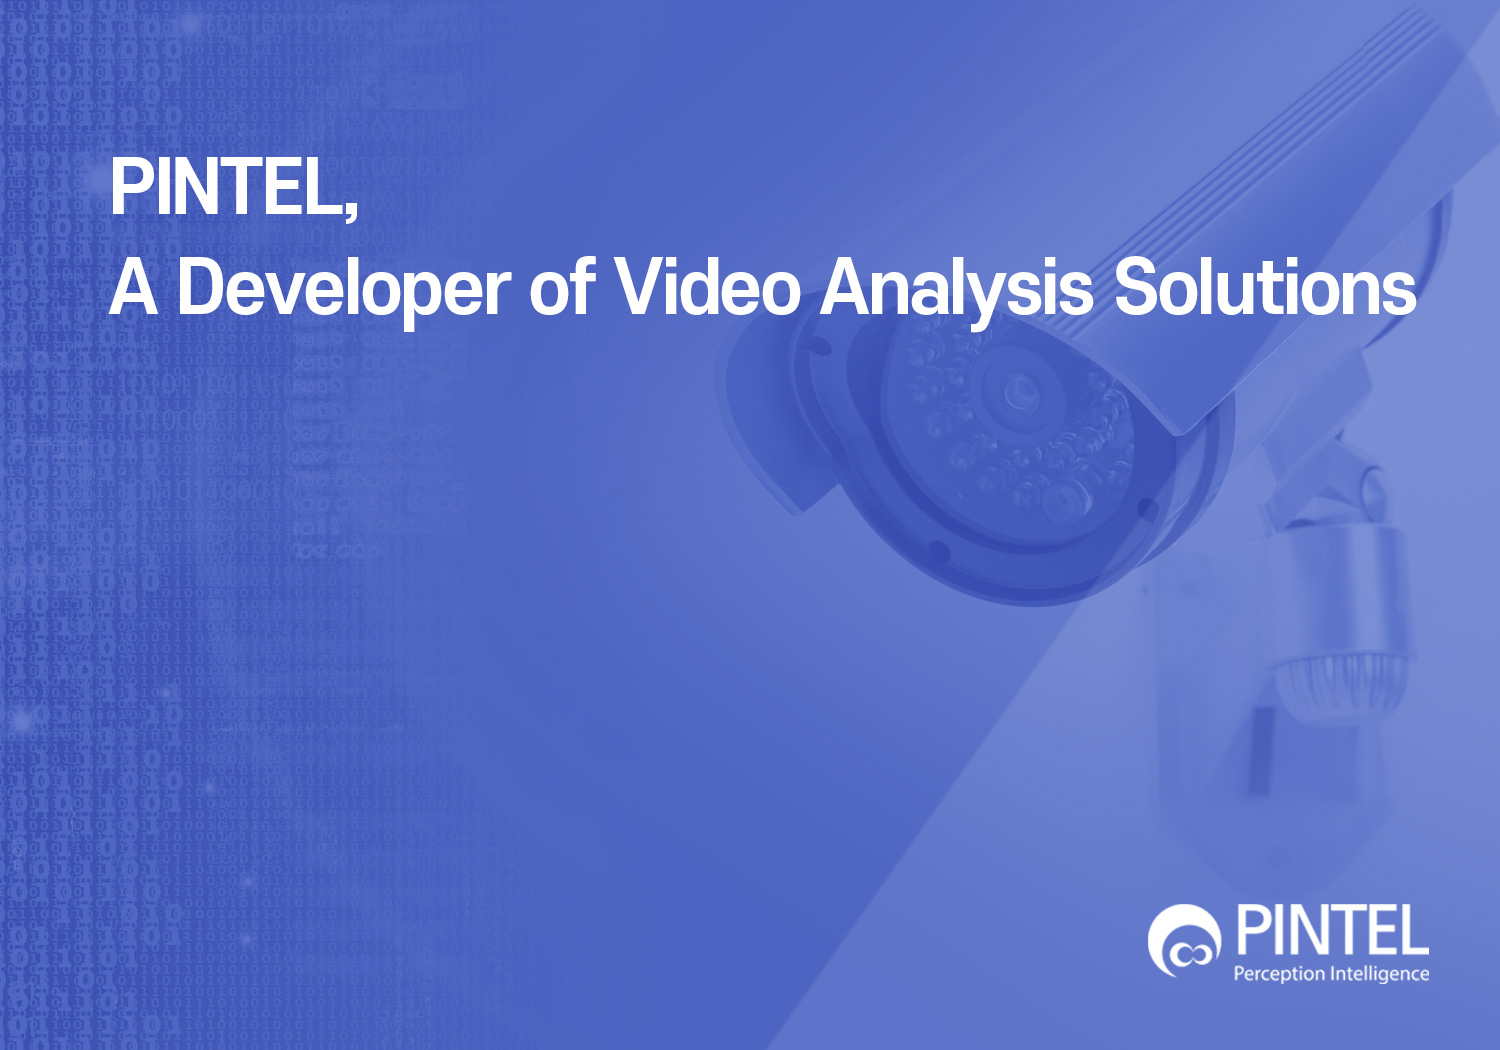 PINTEL, a Developer of Video Analysis Solutions 썸네일